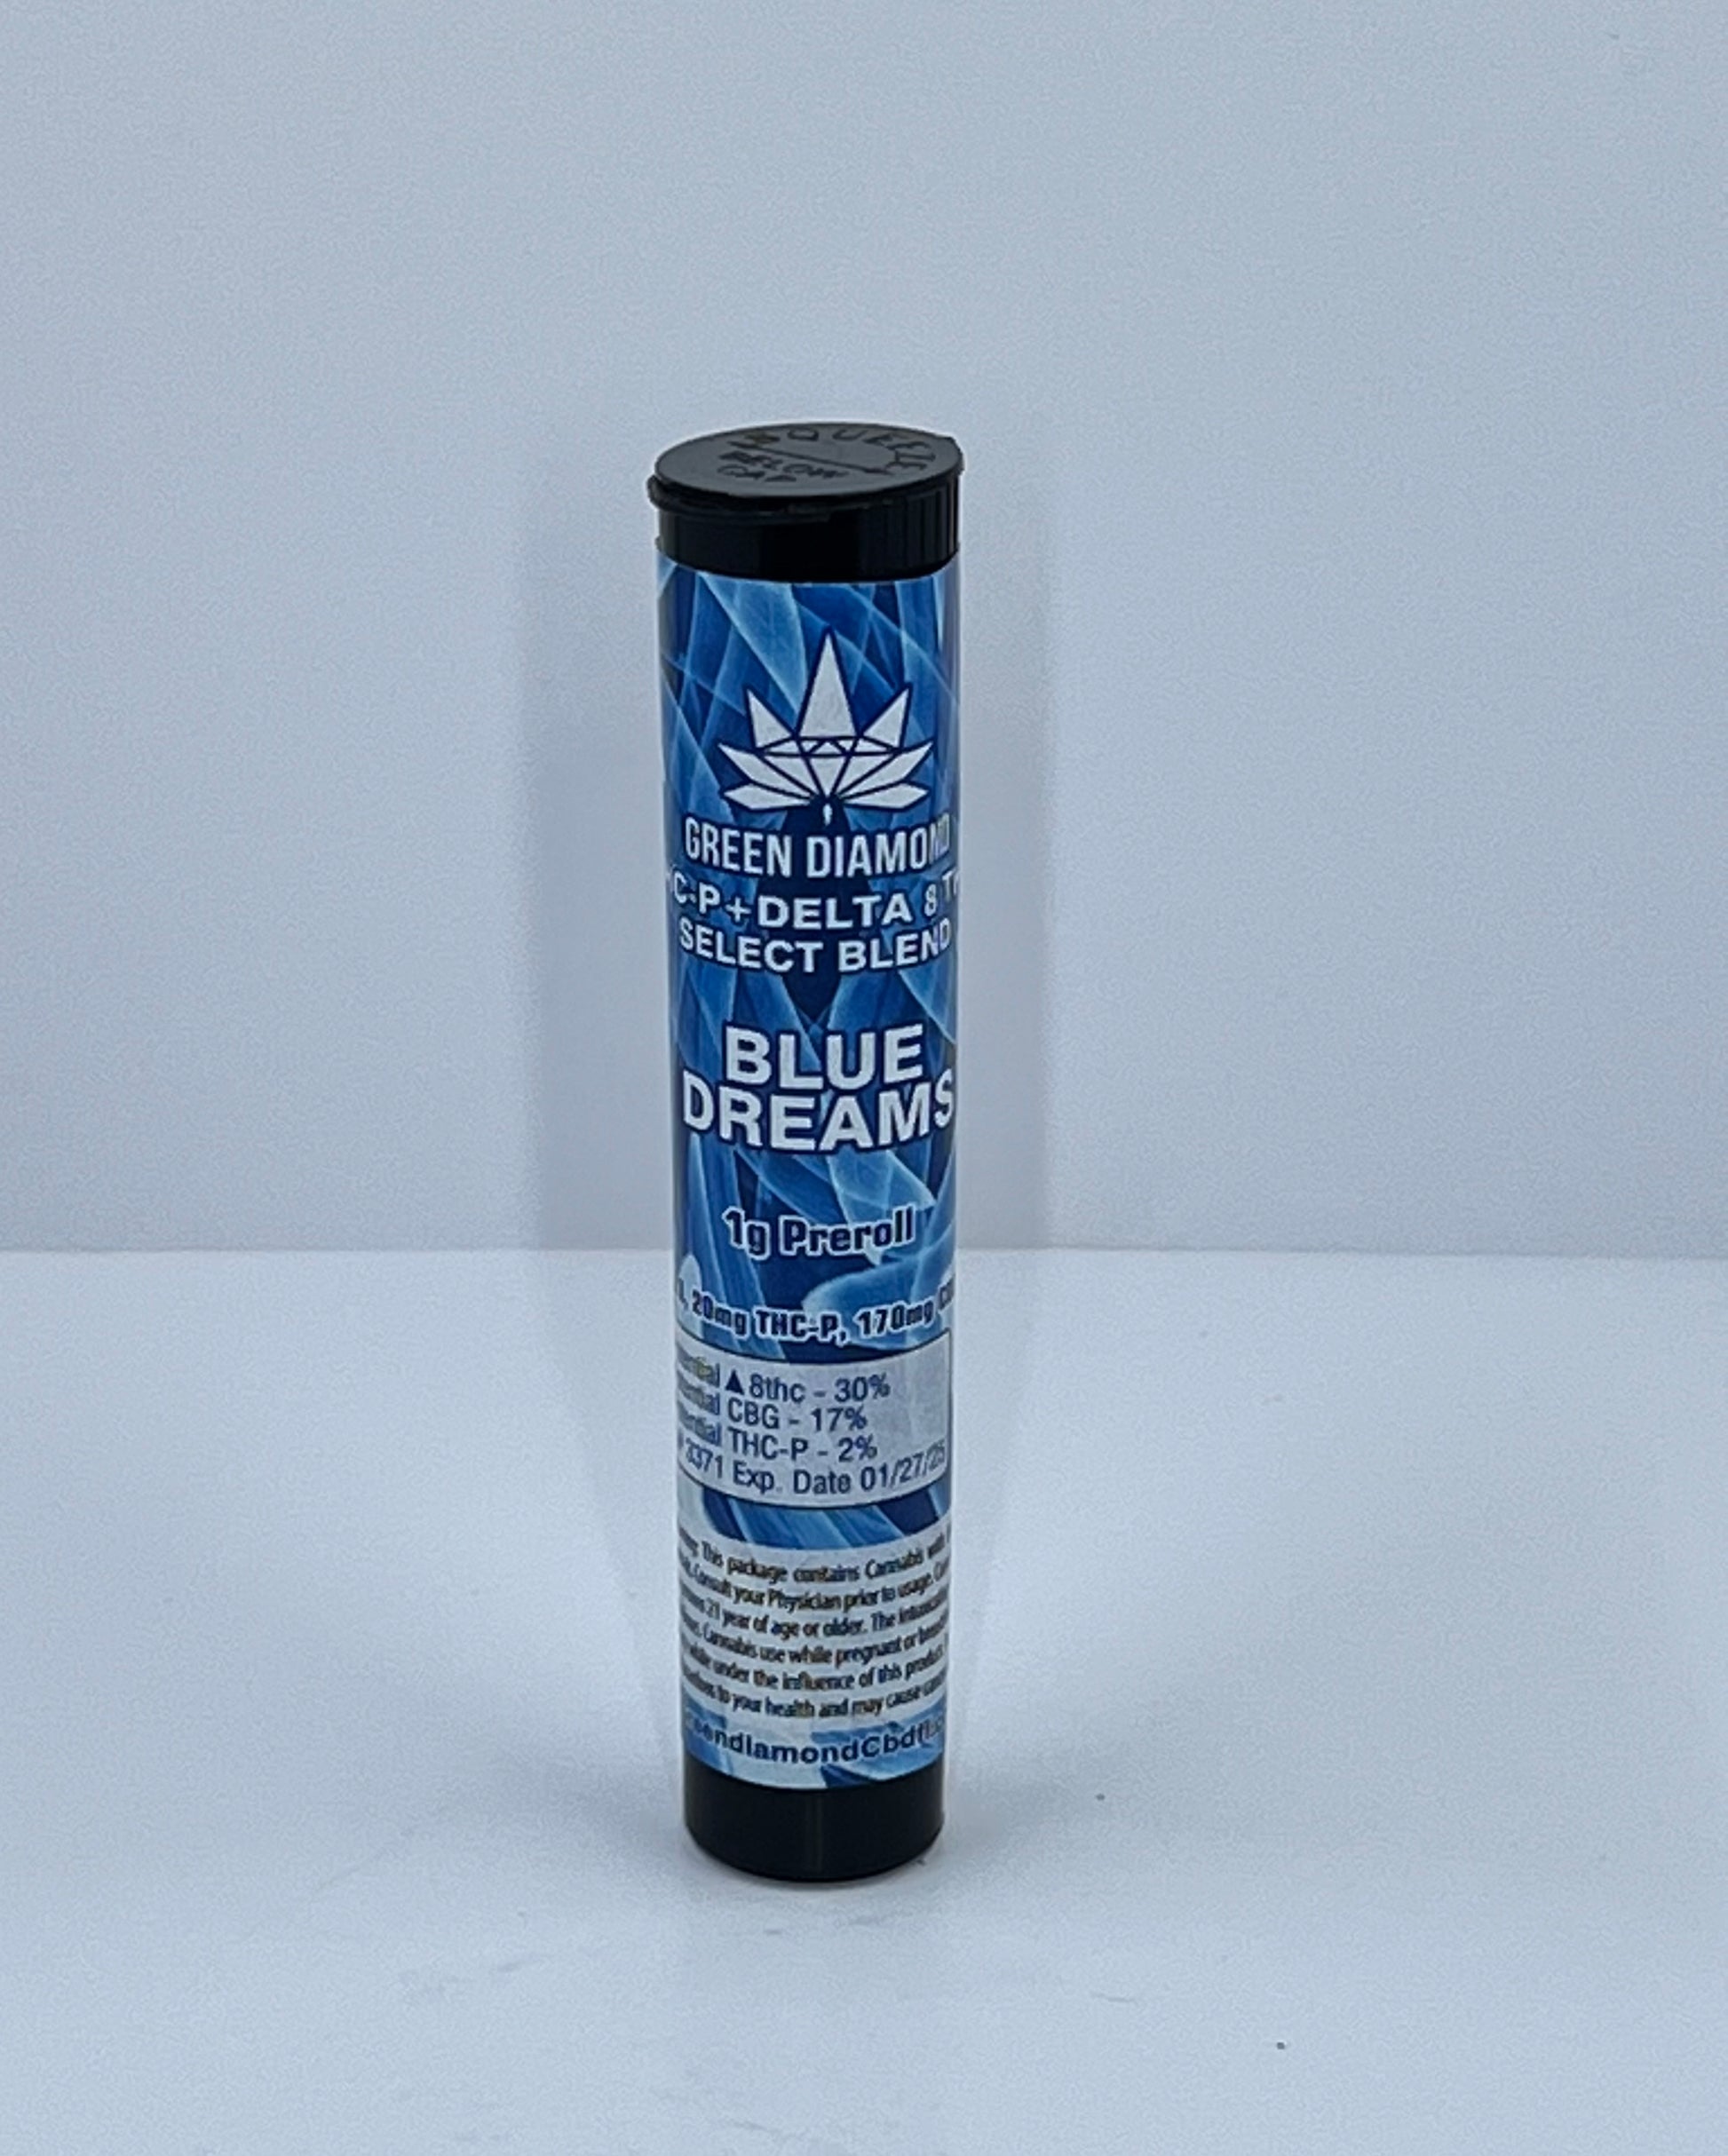 Green Diamond Delta 8 THC + THC-P Blue Dreams Pre-Roll yoga smokes yoga studio, delivery, delivery near me, yoga smokes smoke shop, find smoke shop, head shop near me, yoga studio, headshop, head shop, local smoke shop, psl, psl smoke shop, smoke shop, smokeshop, yoga, yoga studio, dispensary, local dispensary, smokeshop near me, port saint lucie, florida, port st lucie, lounge, life, highlife, love, stoned, highsociety. Yoga Smokes